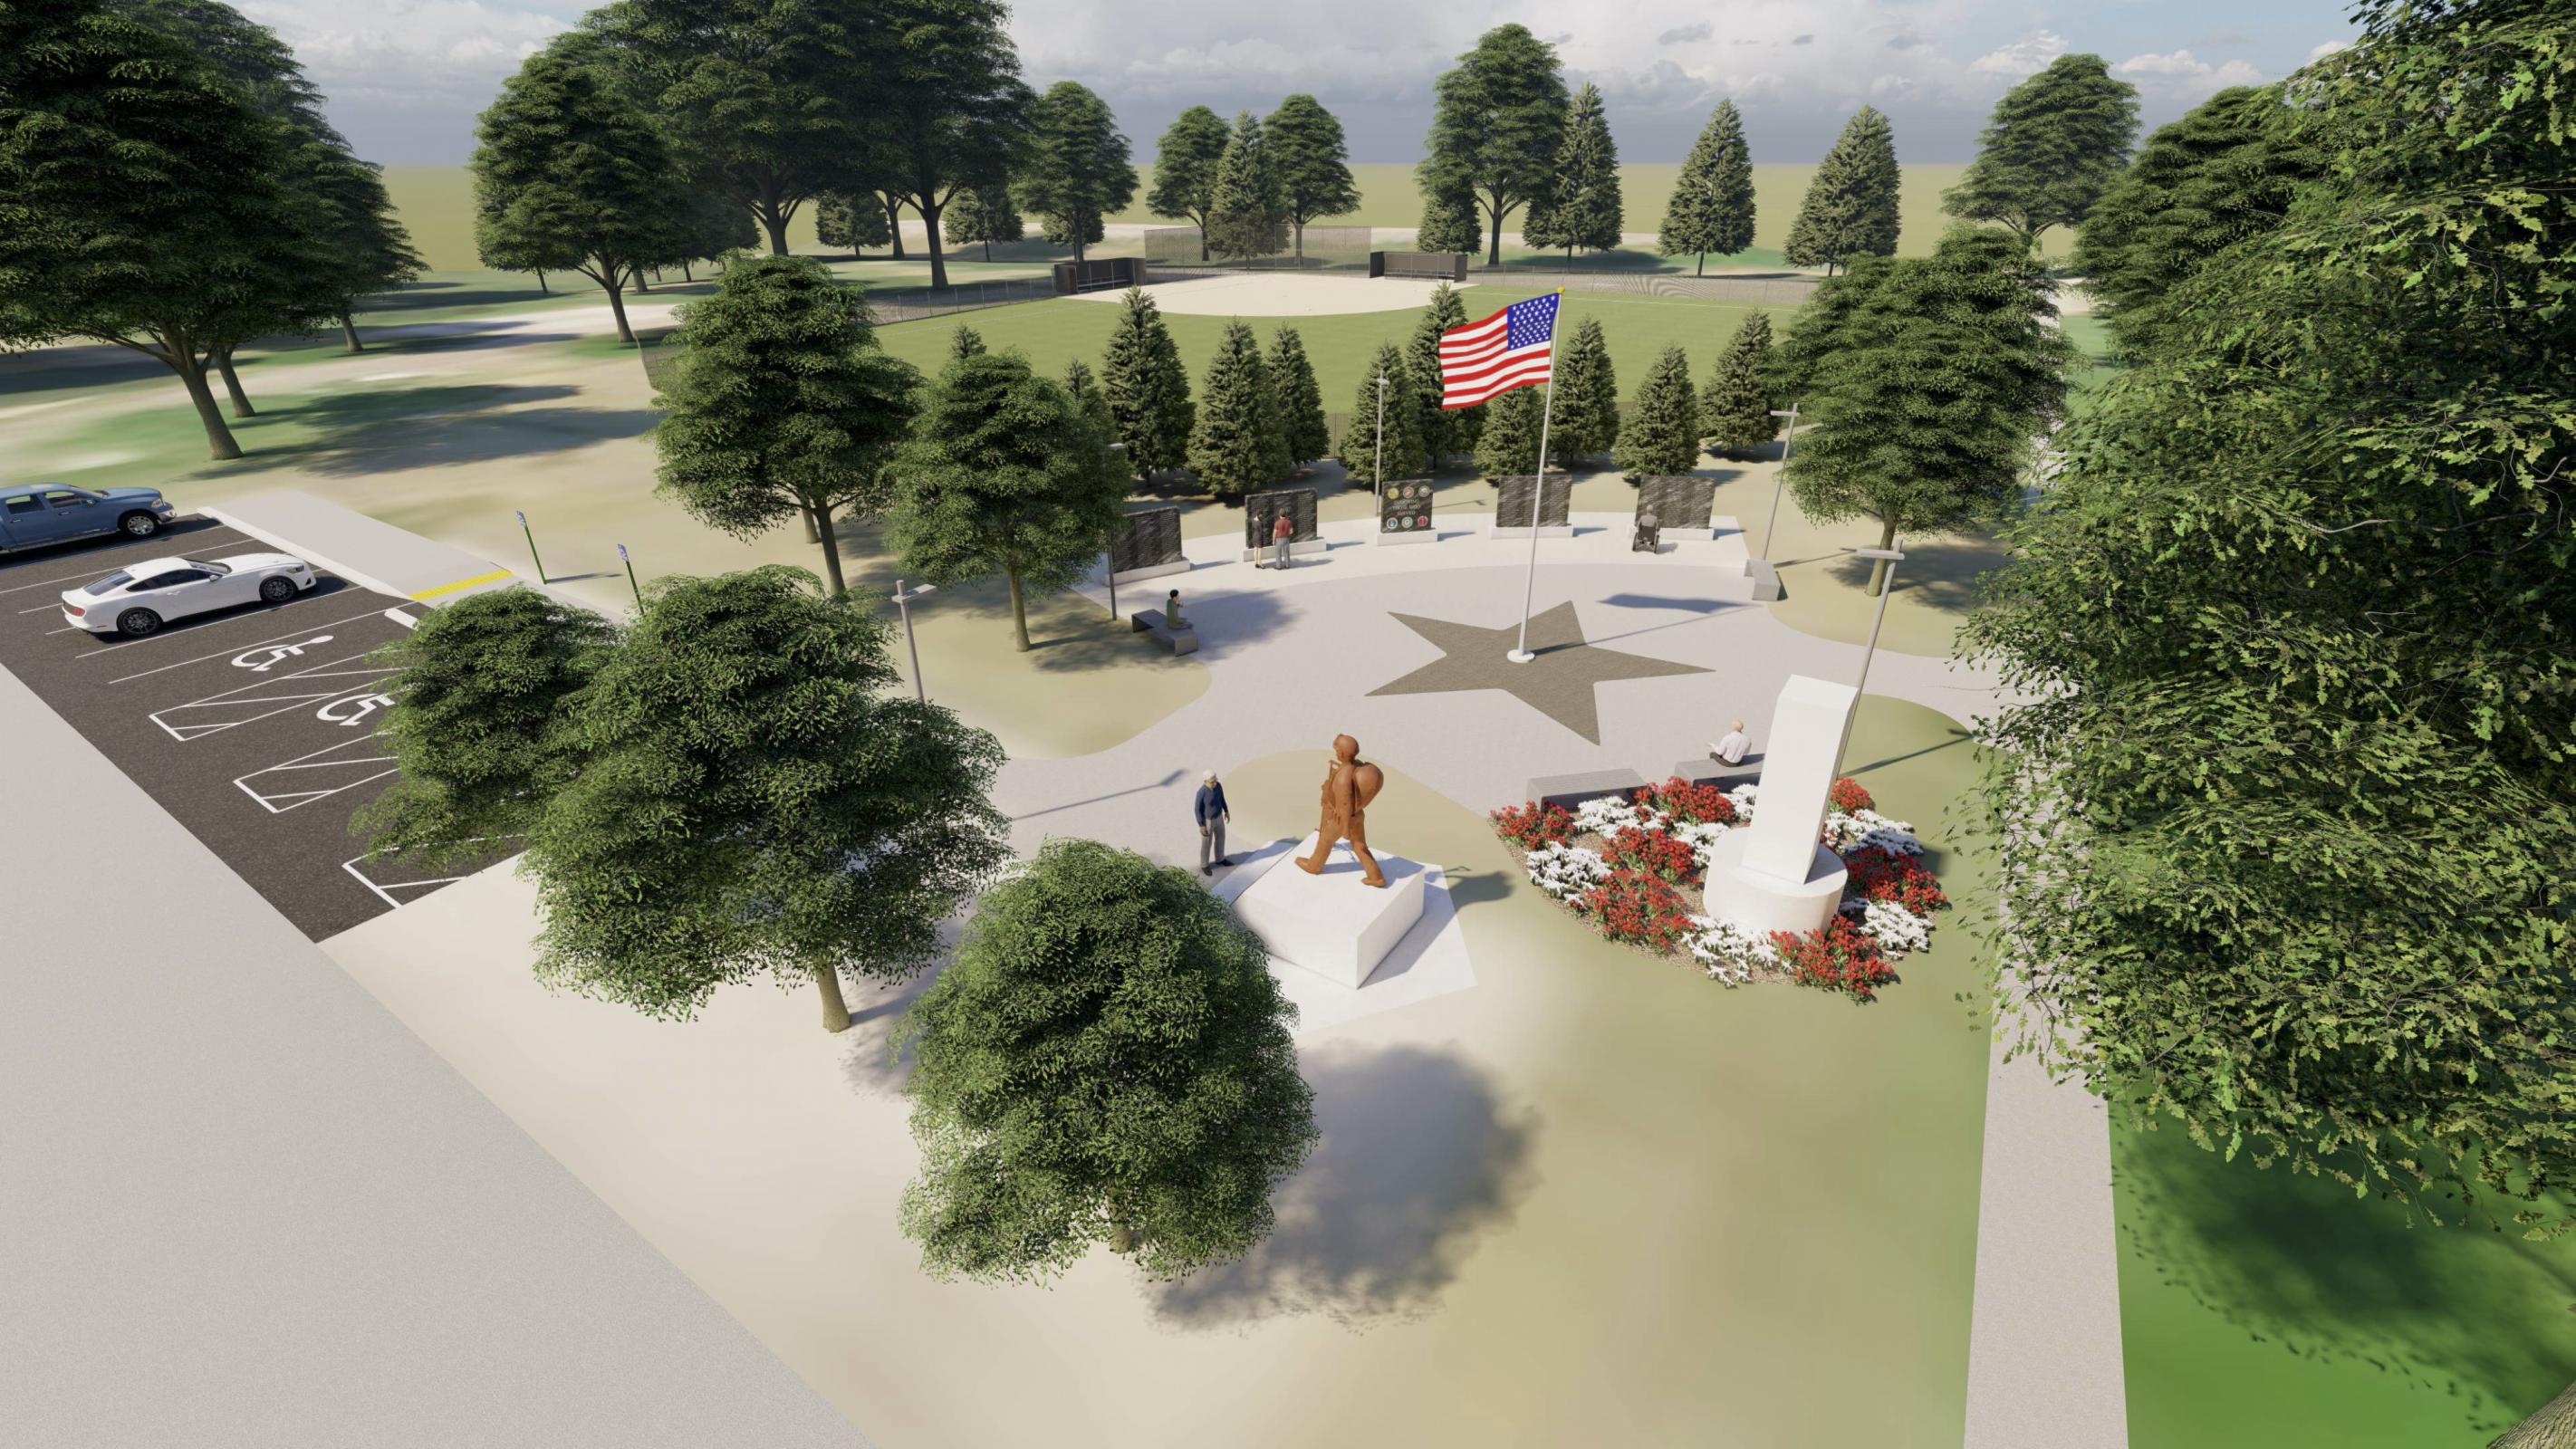 Submit Names by July 17 for New Veterans Memorial Main Photo